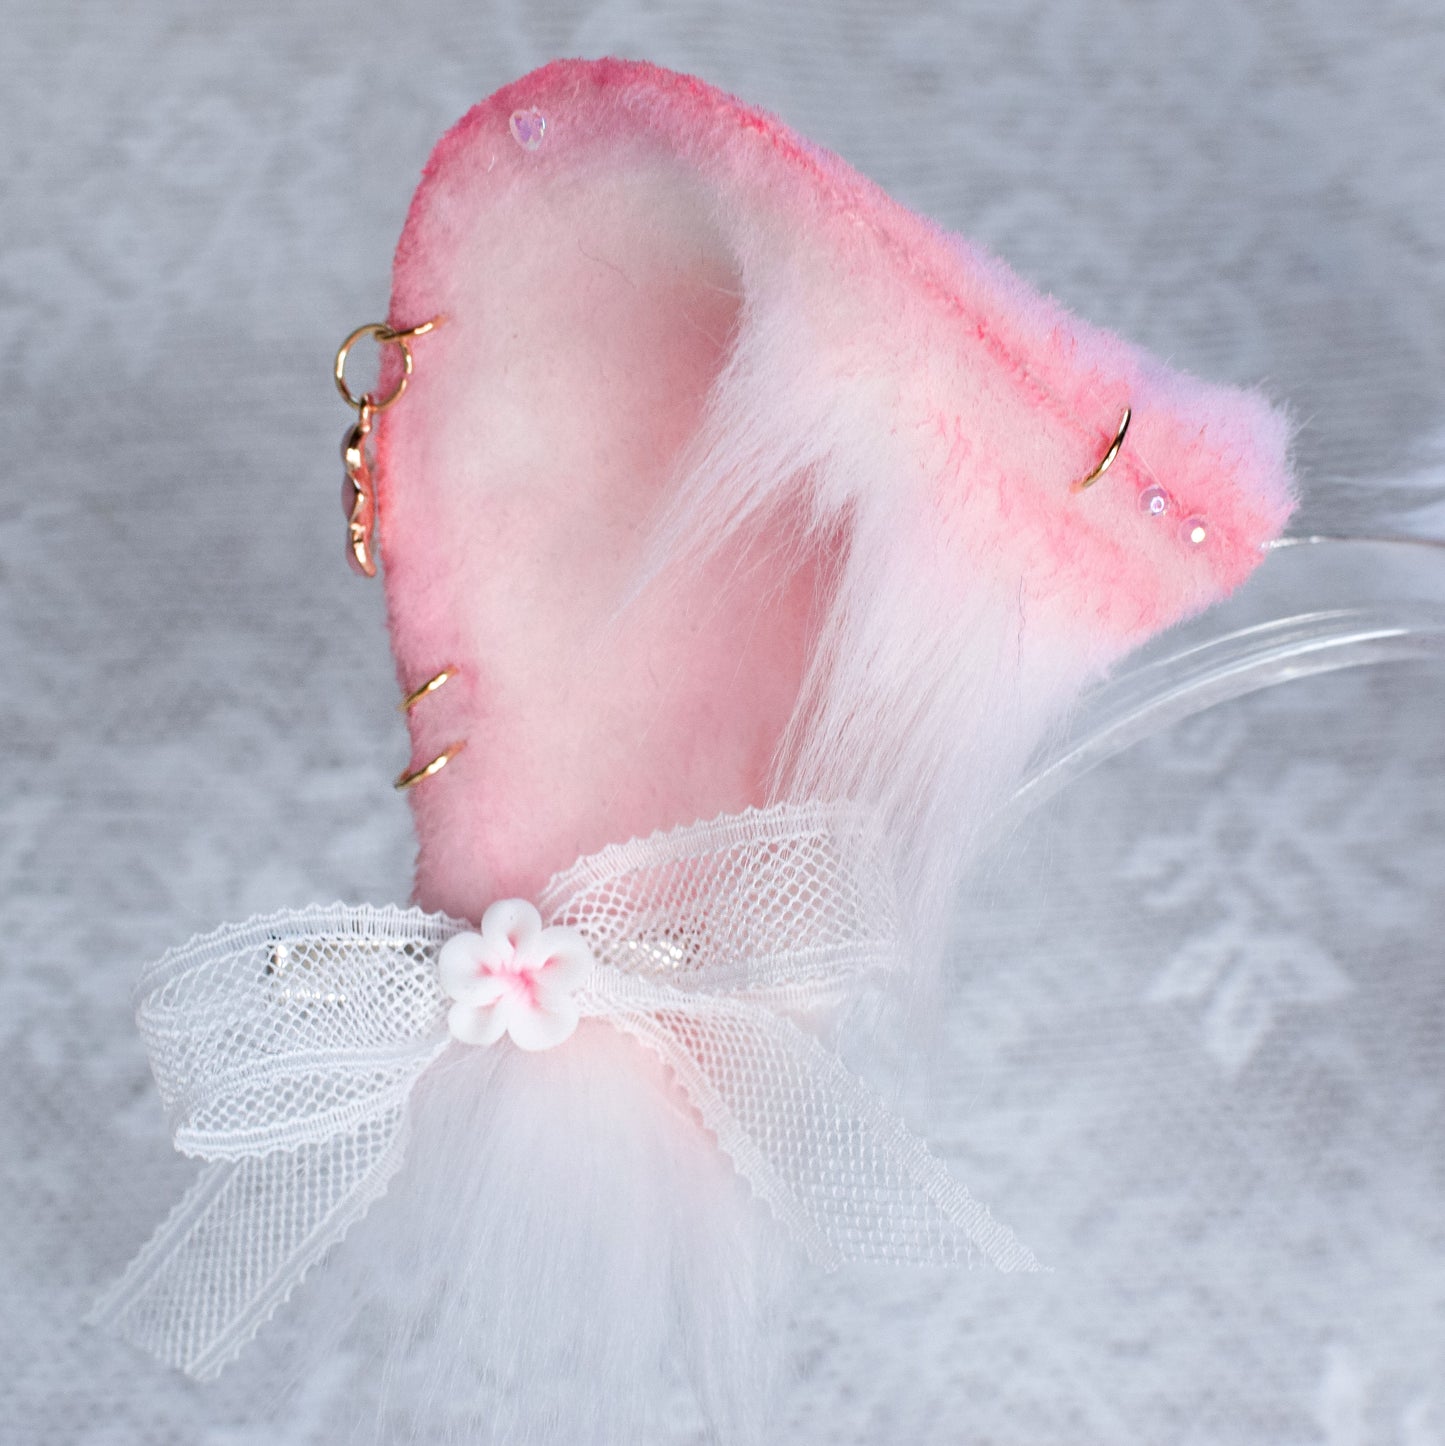 Kitsune Cosplay Ears in pink with charms